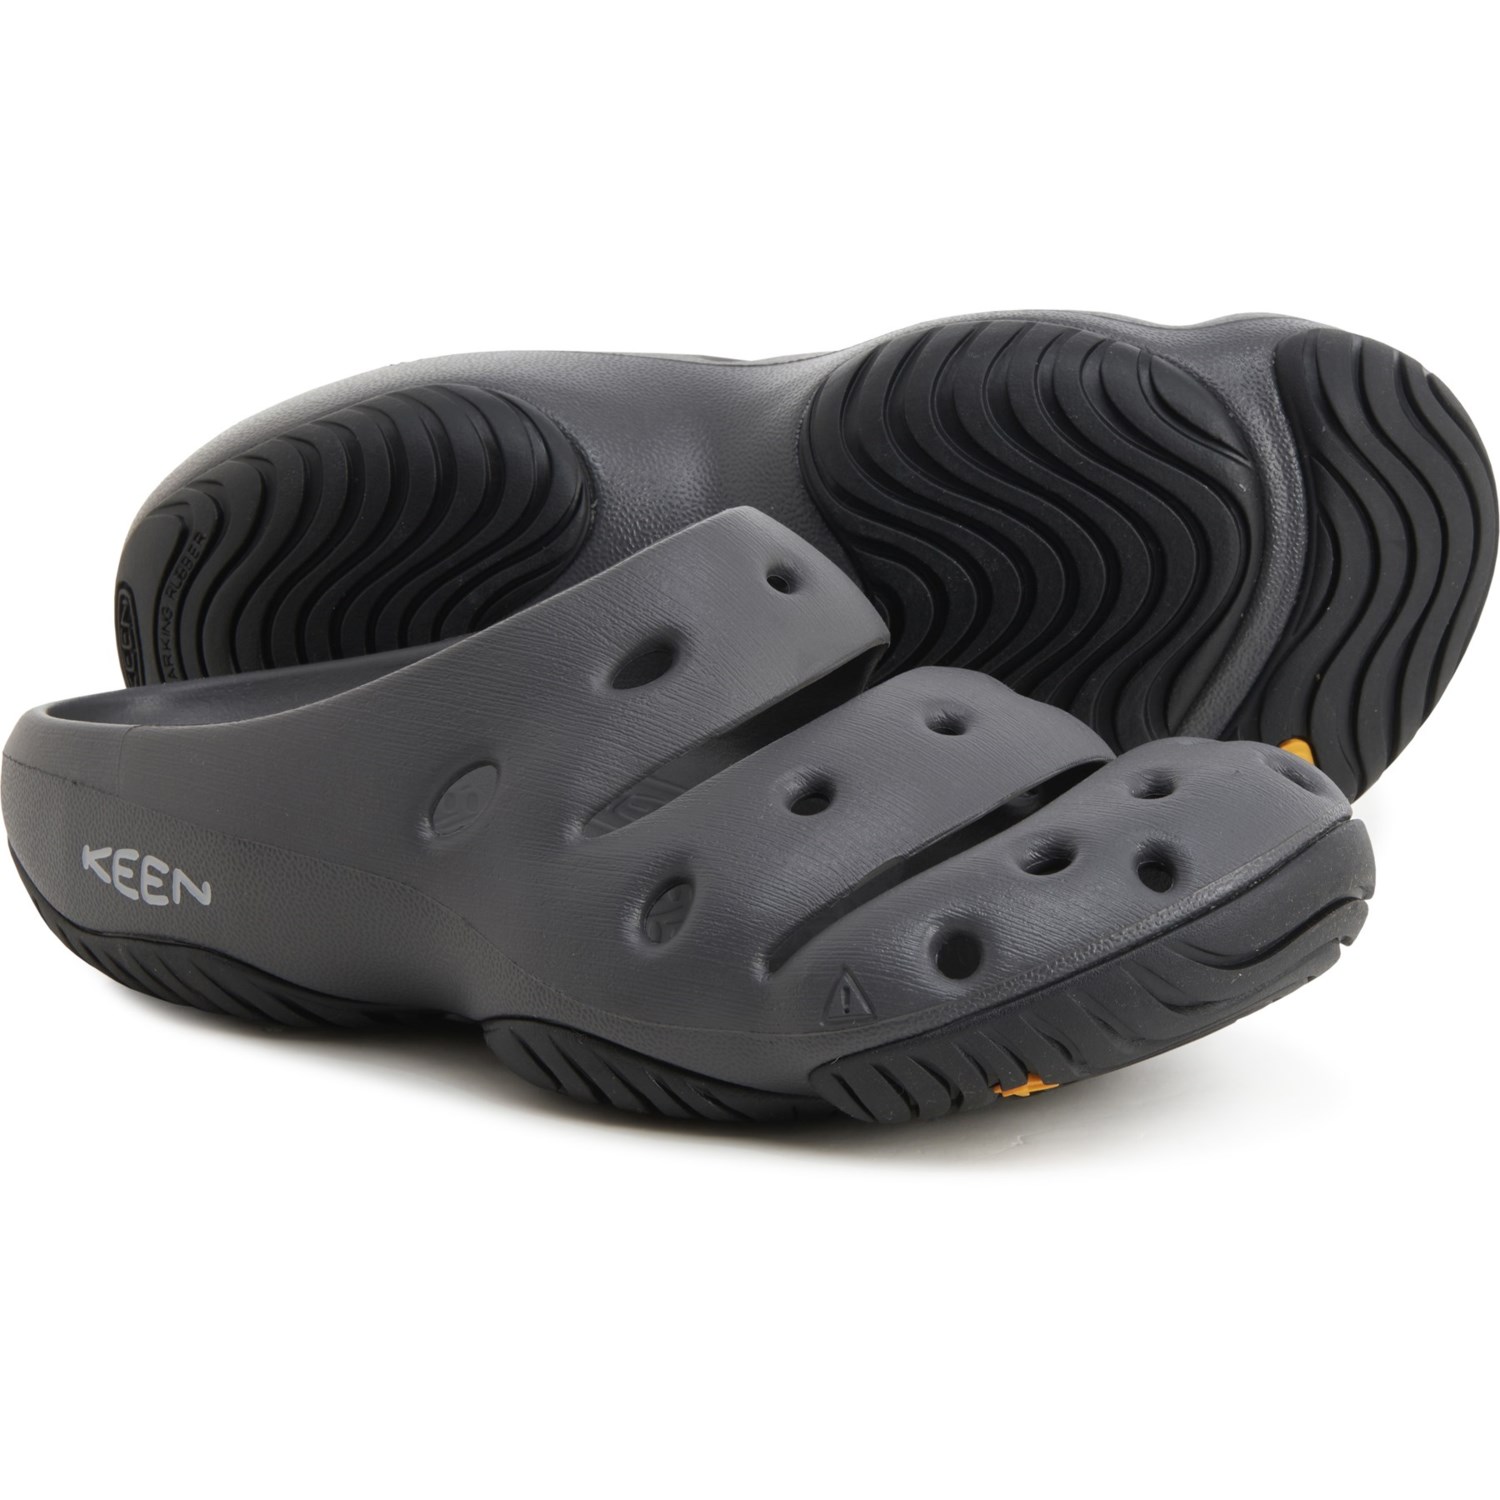 Keen Yogui Clogs (For Men) - Save 25%